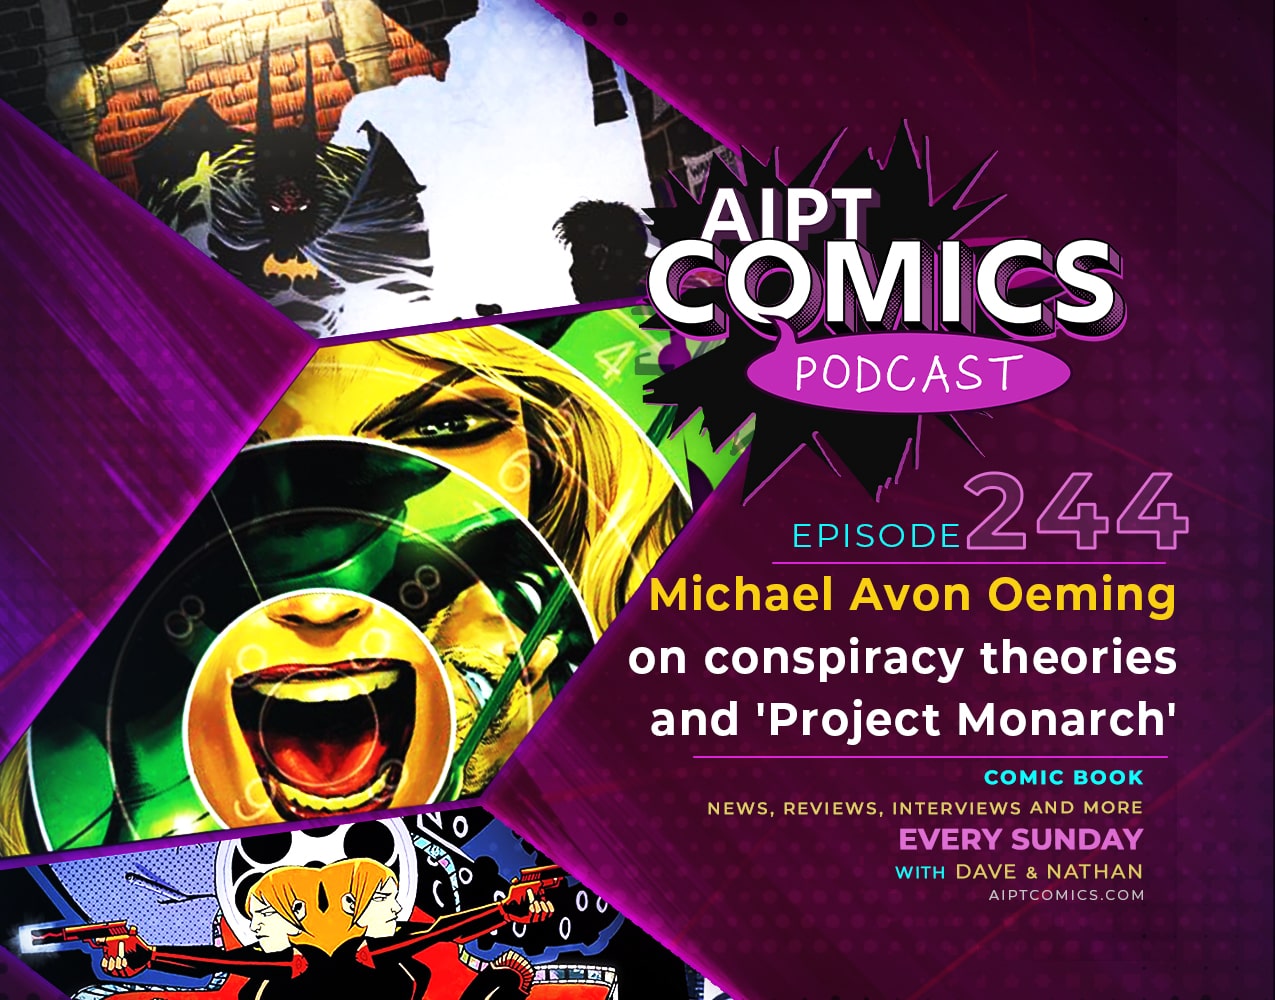 AIPT Comics Podcast Episode 244: Michael Avon Oeming on conspiracy theories and 'Project Monarch'